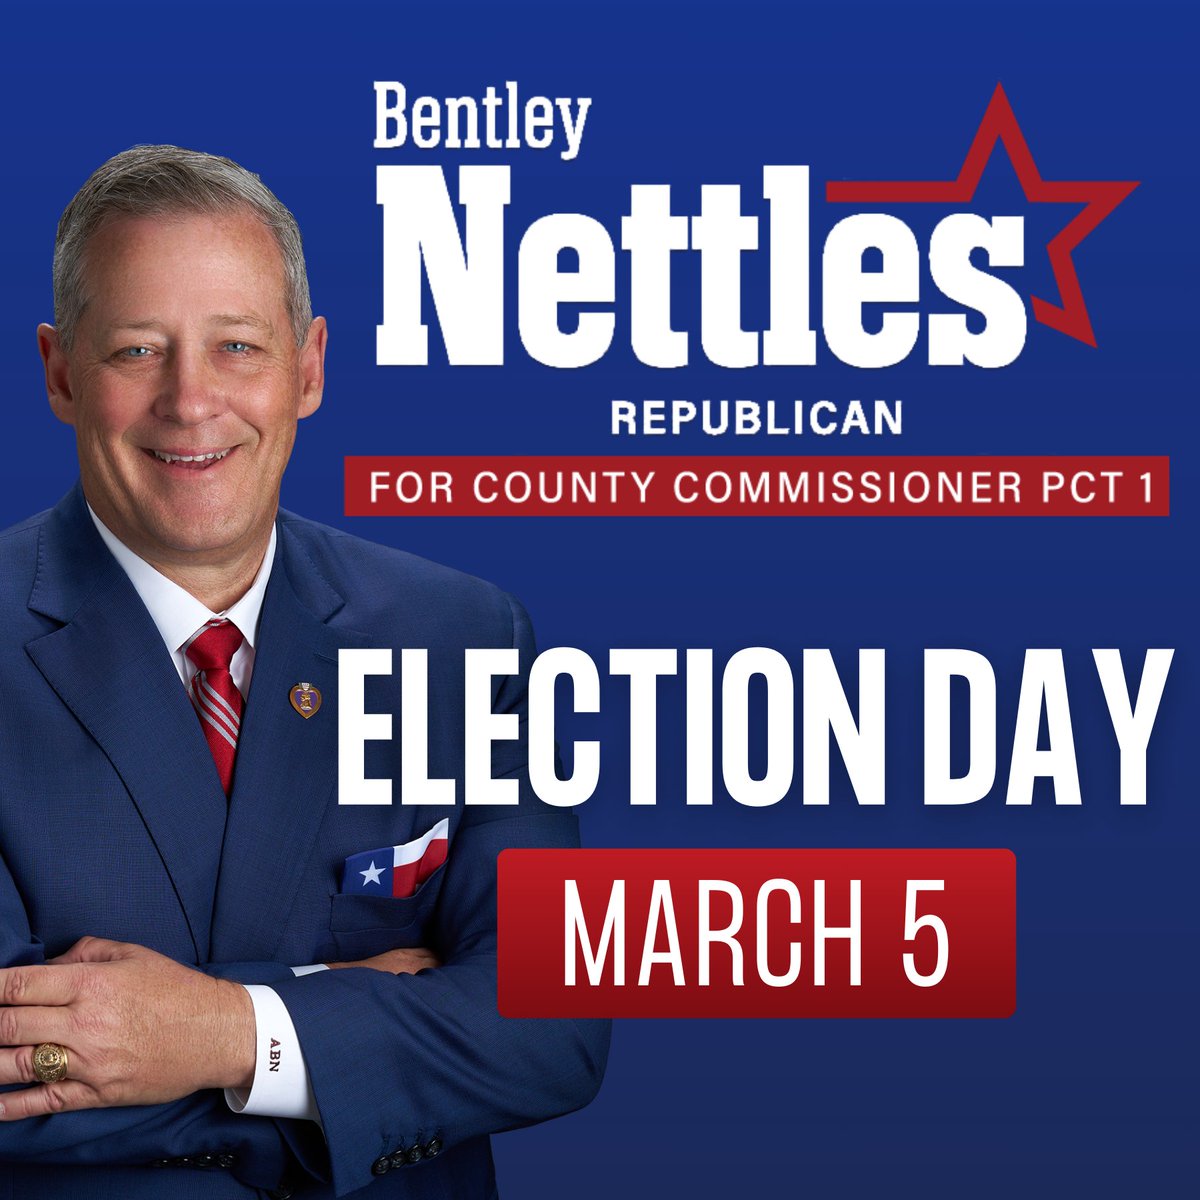 As leaders, we must understand that management of our county assets matter. I will bring more than 40 years of budgetary experience to the court. 

Today is Election Day. I humbly ask for your vote. bentleynettles.com/election-day

#VoteTexas